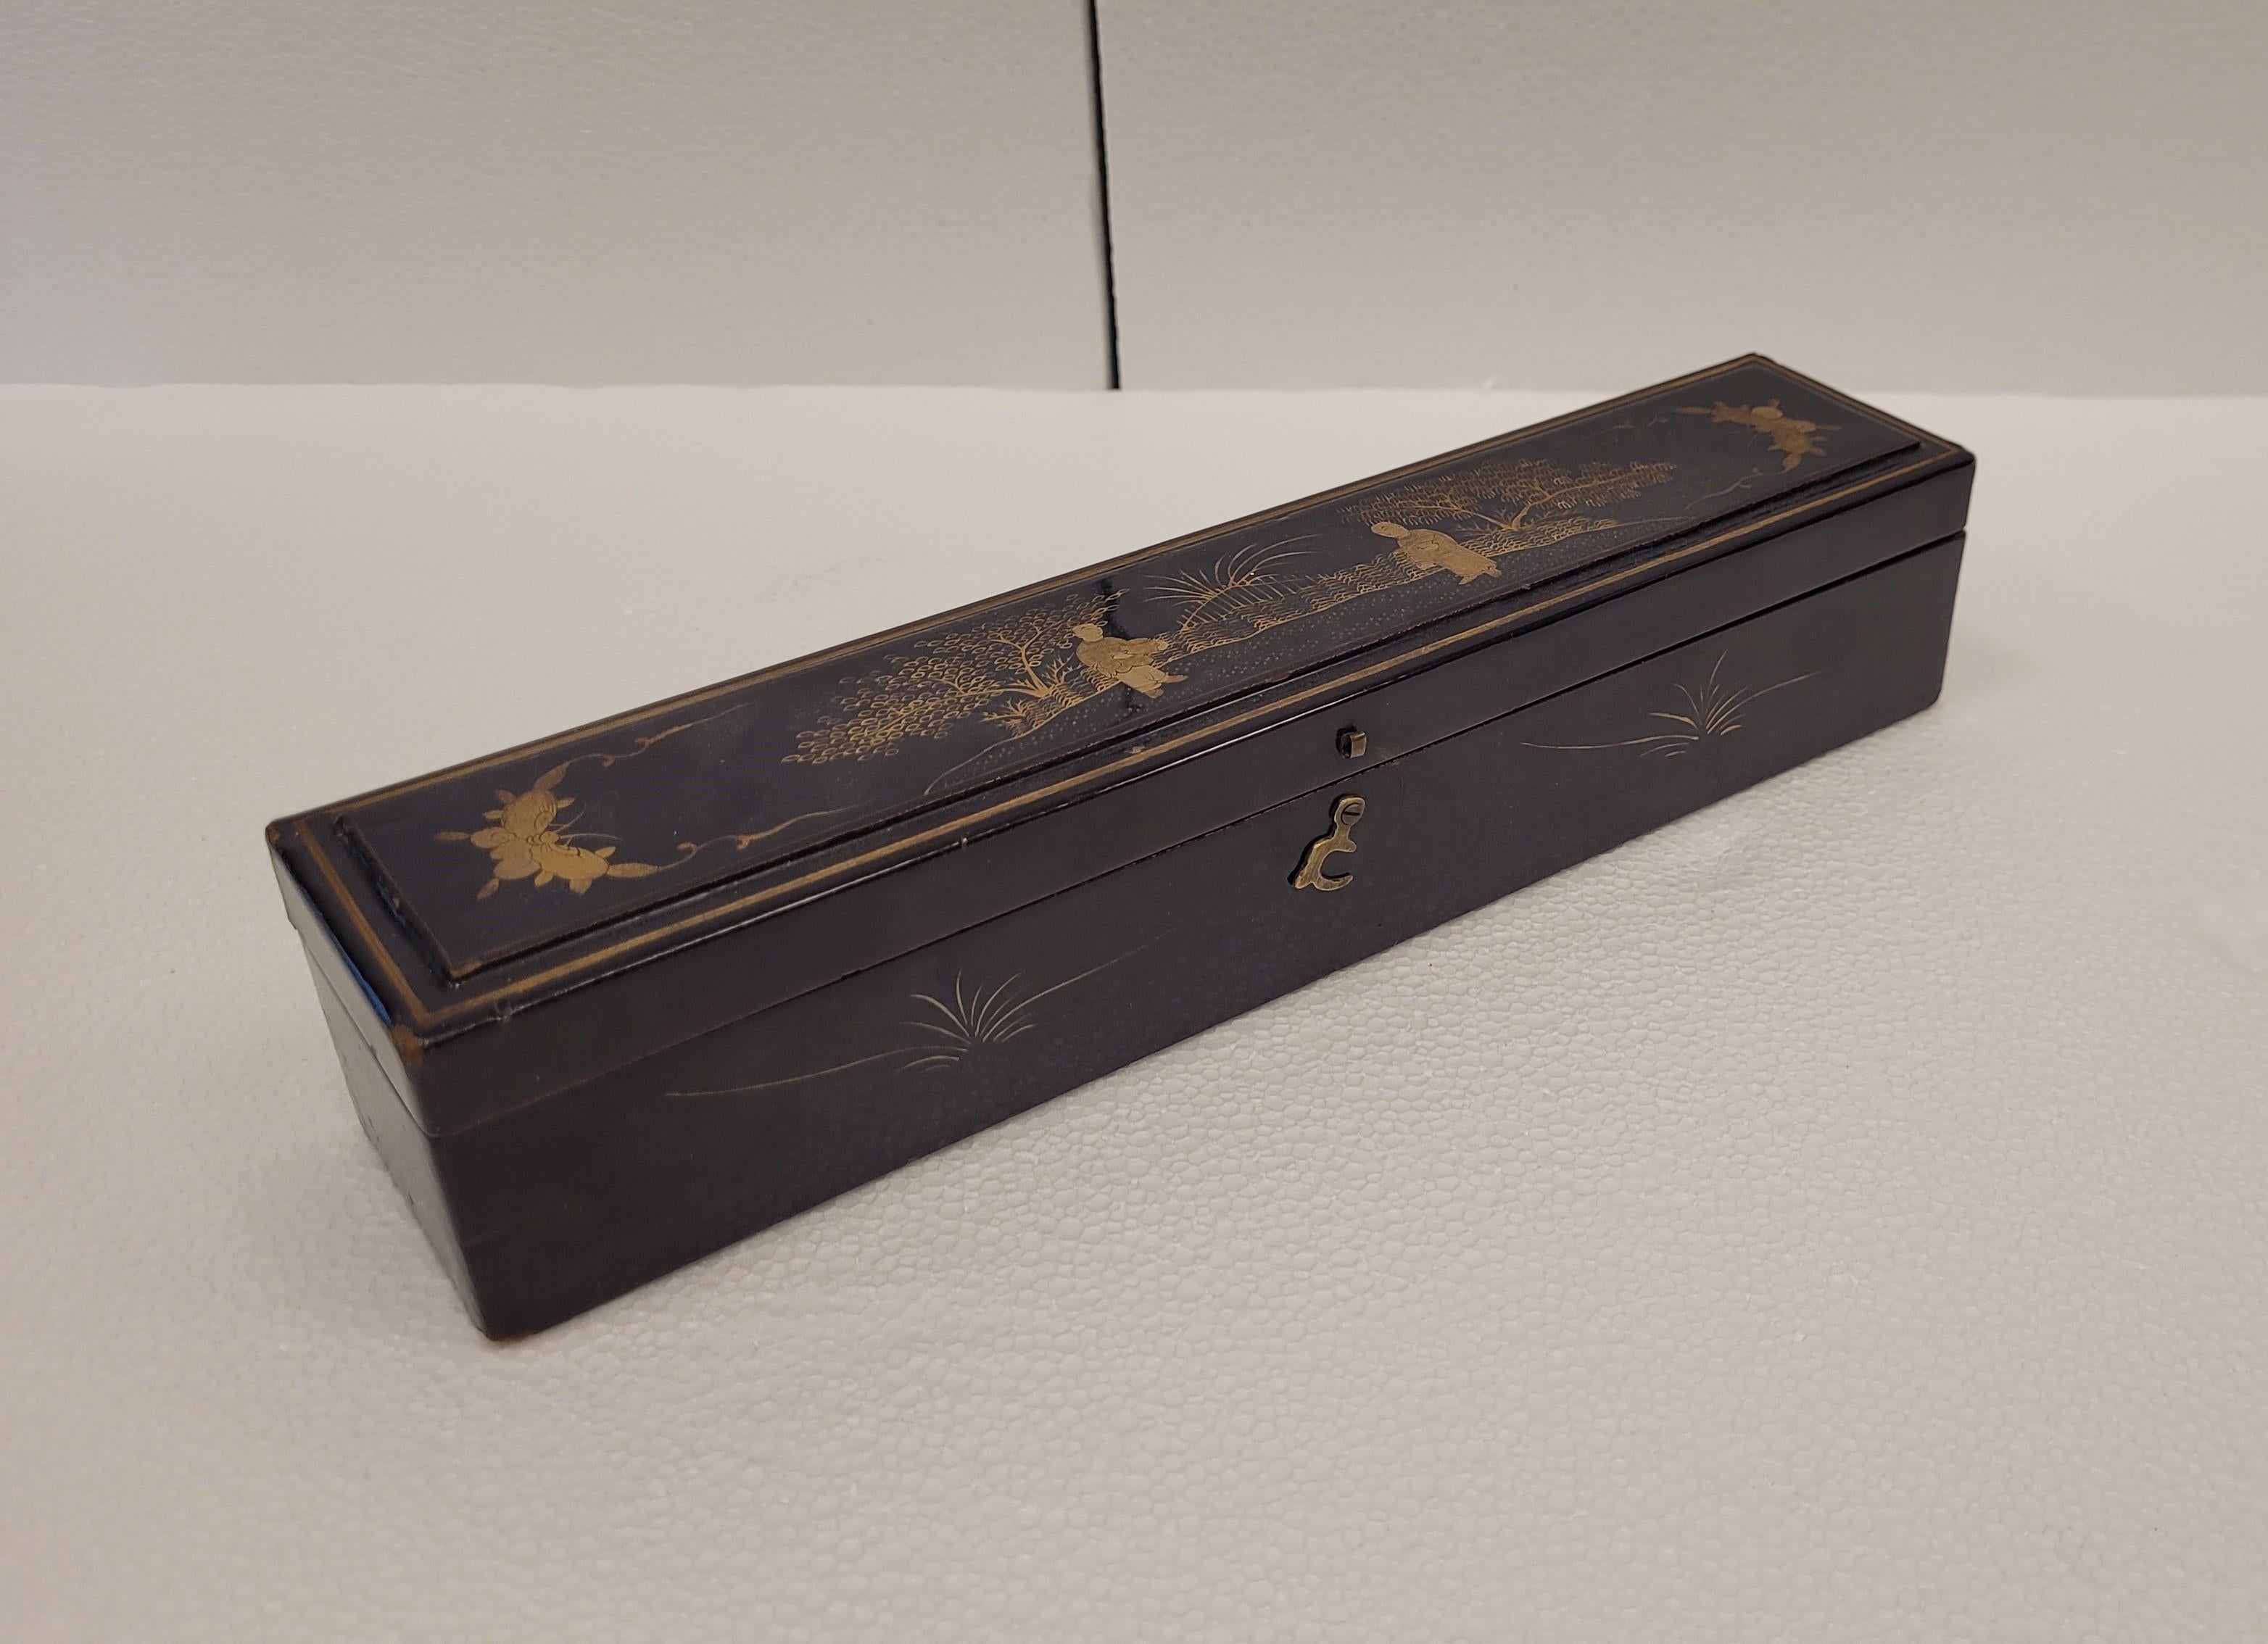 Chinese conchinoiseries box in black lacquered wood and silk interior
Exquisite and beautiful Chinese box in lacquered wood with gold chinoiseries representing different Chinese custom scenes.
Inside the box is lined with hand-painted silk
With a